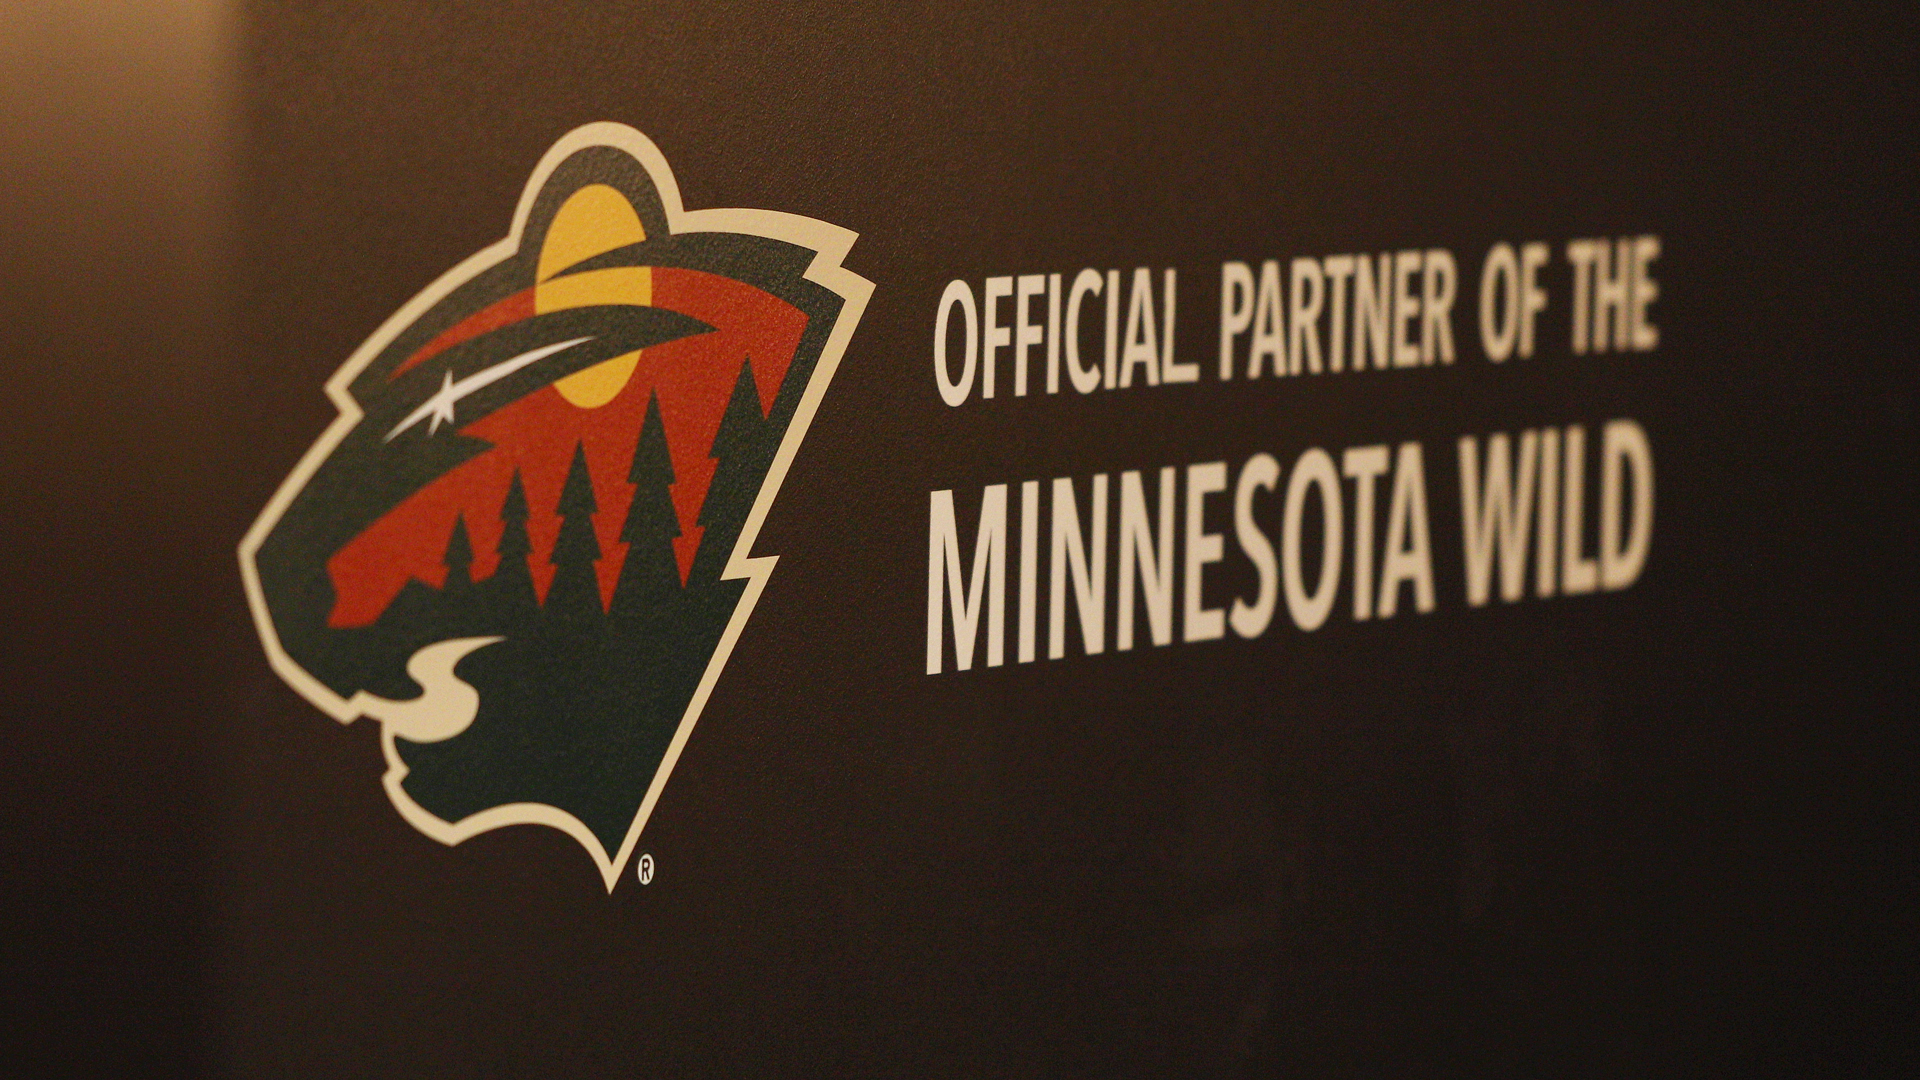 A custom wall decal with the Minnesota Wild logo and Official Partner of the Minnesota Wild printed in white.